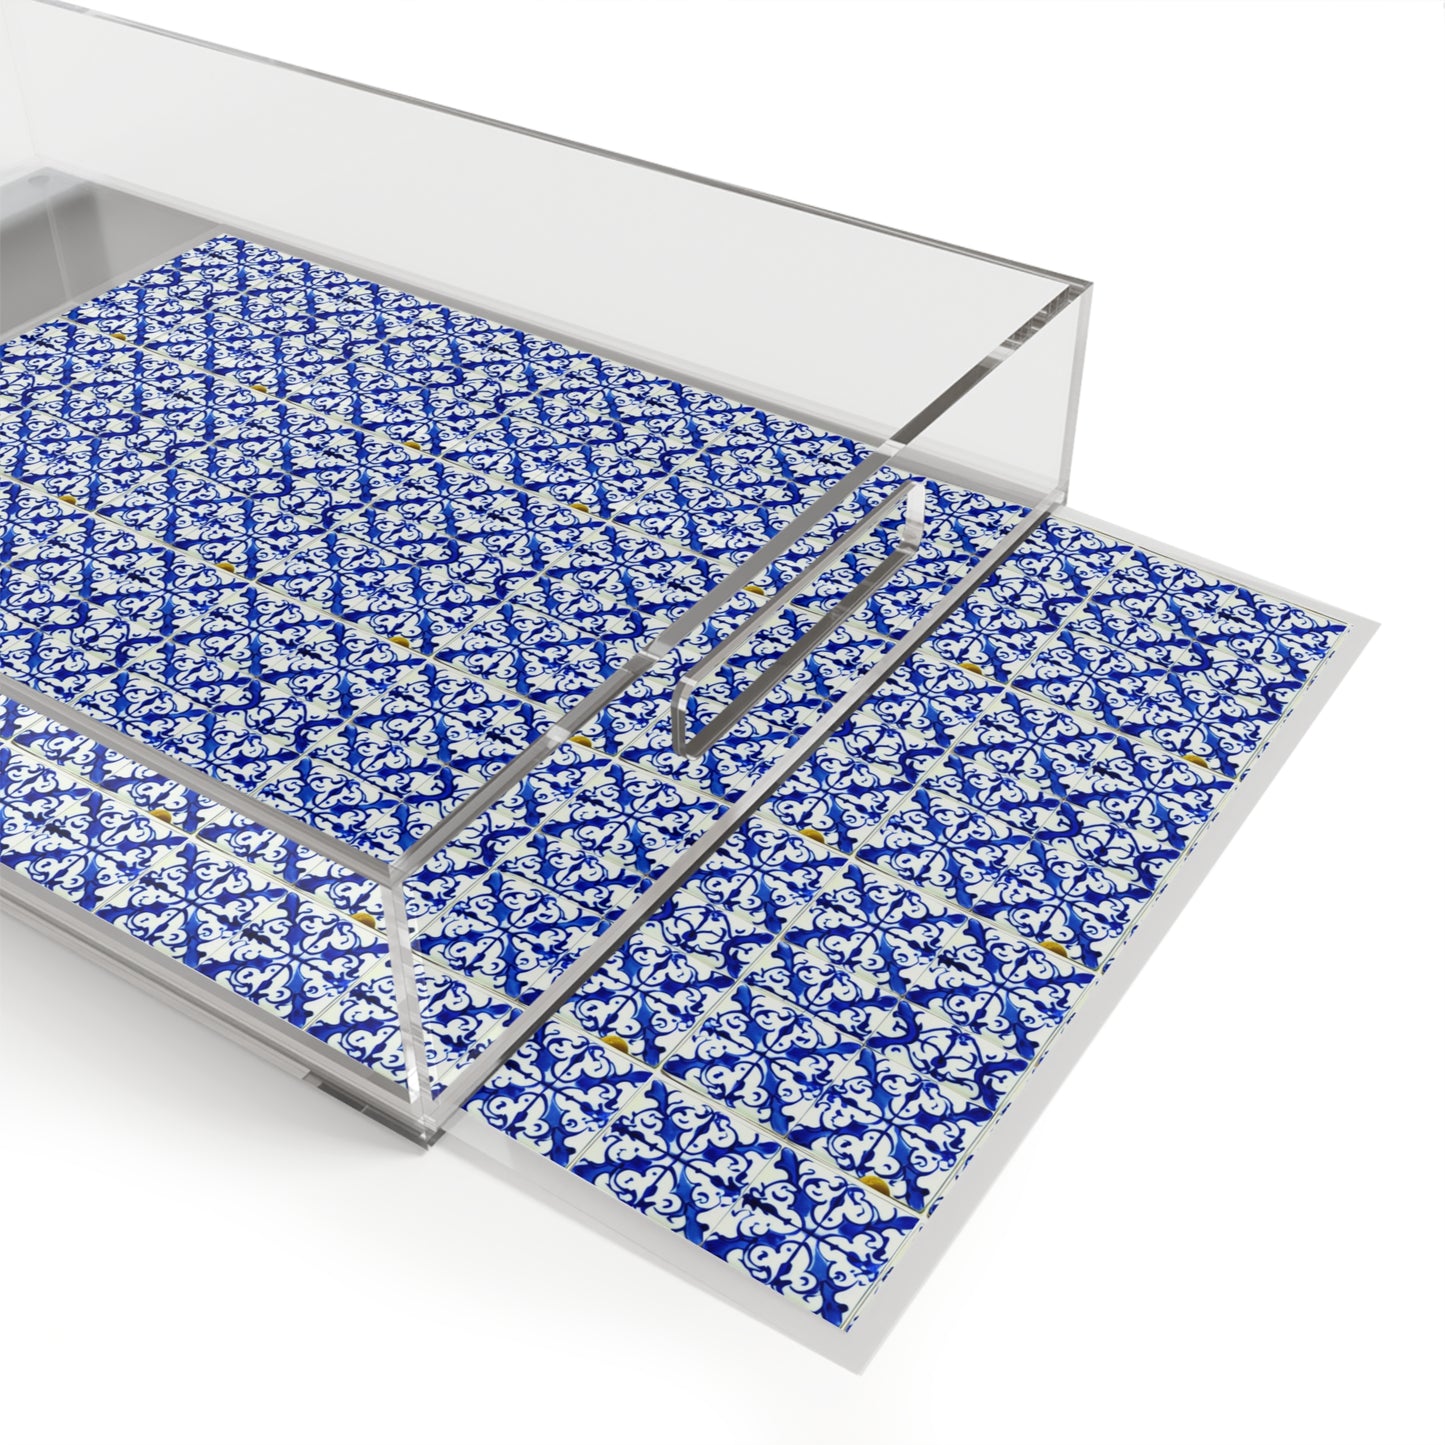 Blue and White Iron Gate Pattern Vintage Portugal Patio Entertaining Outdoor Acrylic Serving Tray